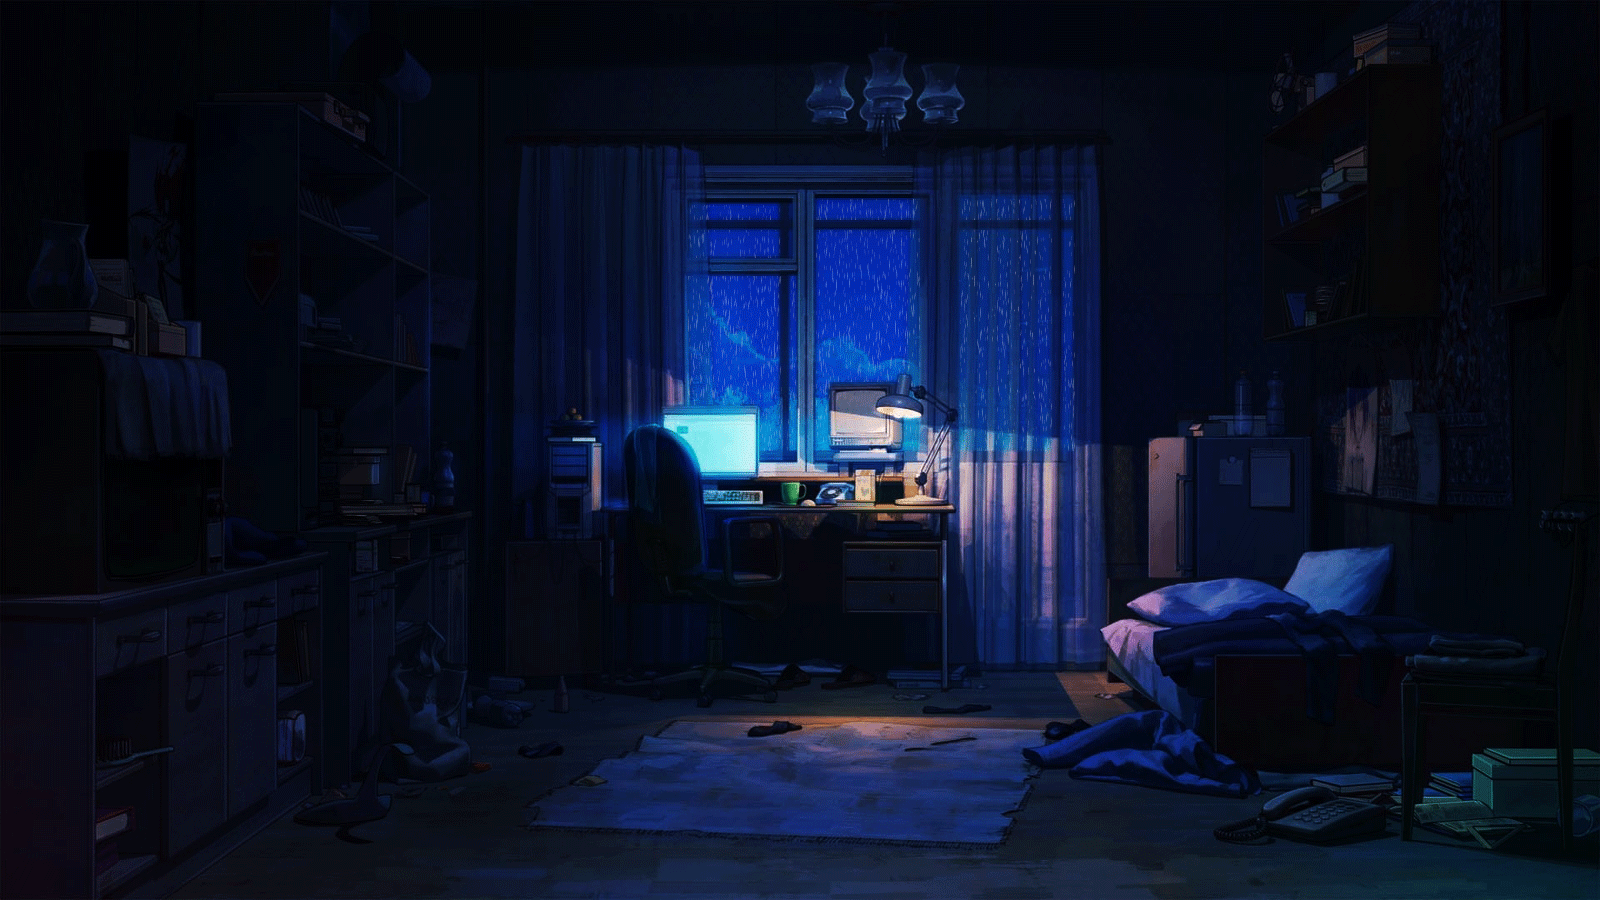 Aesthetic Anime Bedroom Wallpapers - Wallpaper Cave